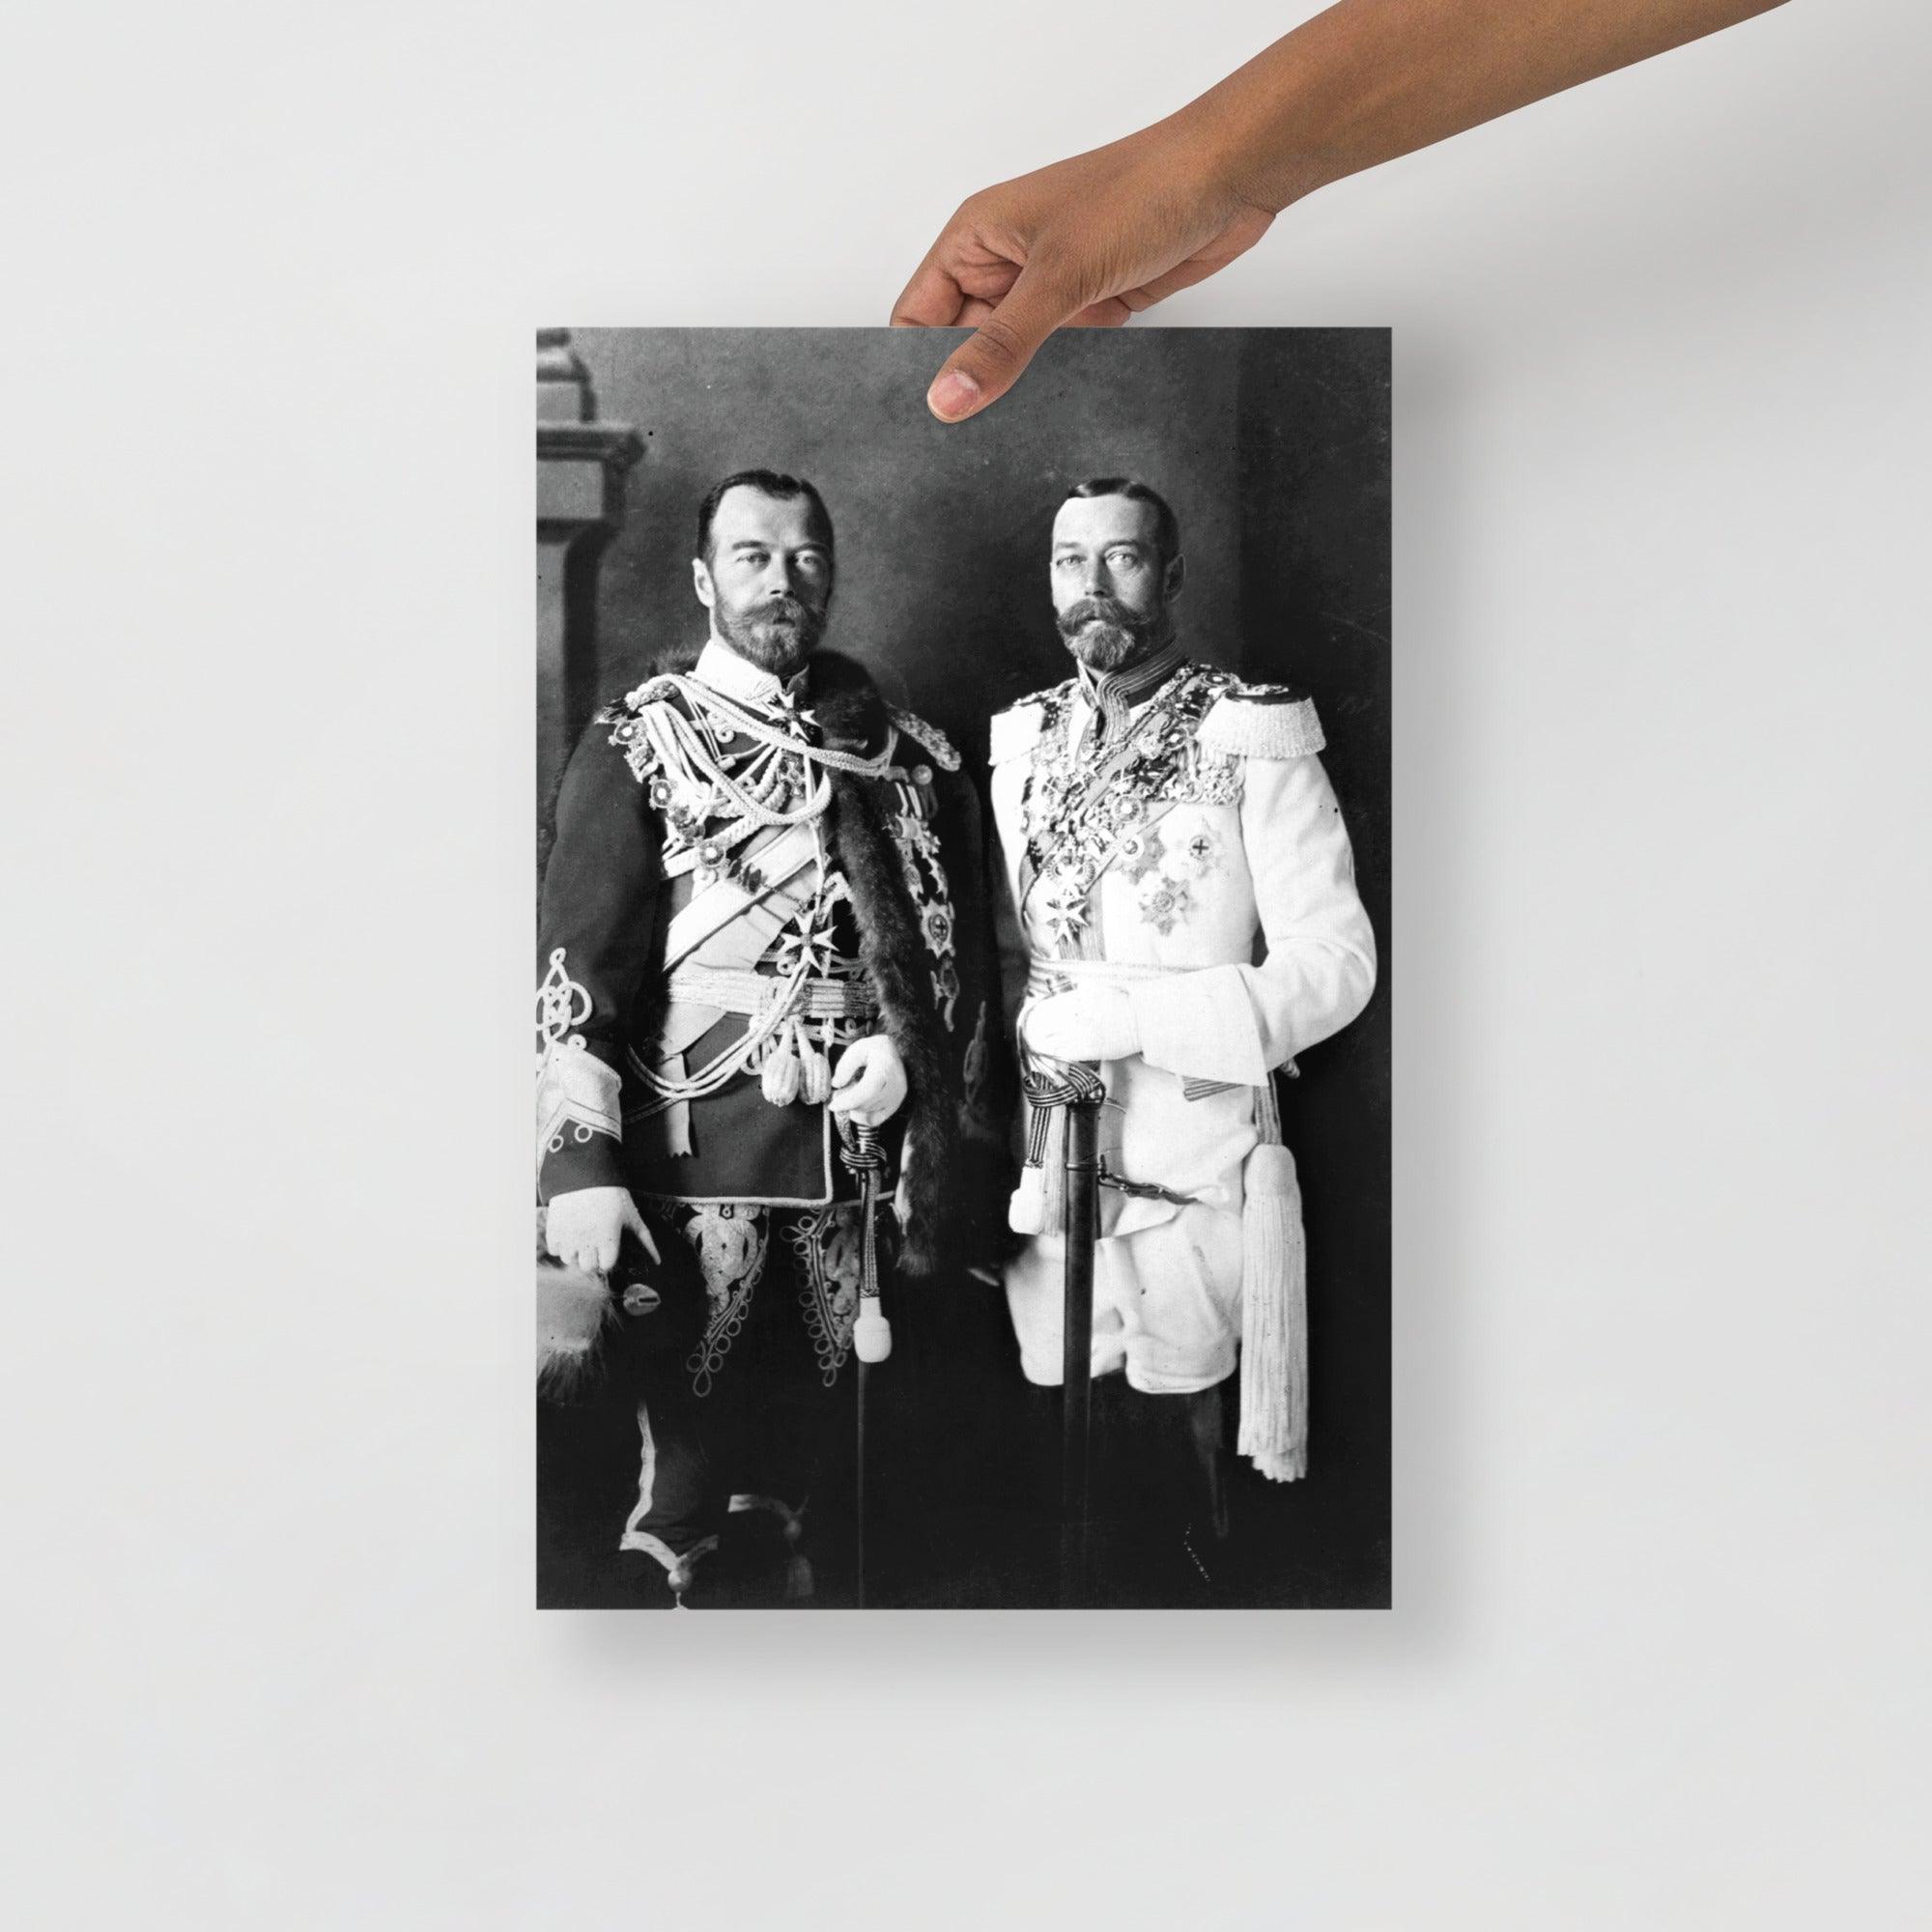 A Tsar Nicholas II & King George V poster on a plain backdrop in size 12x18”.